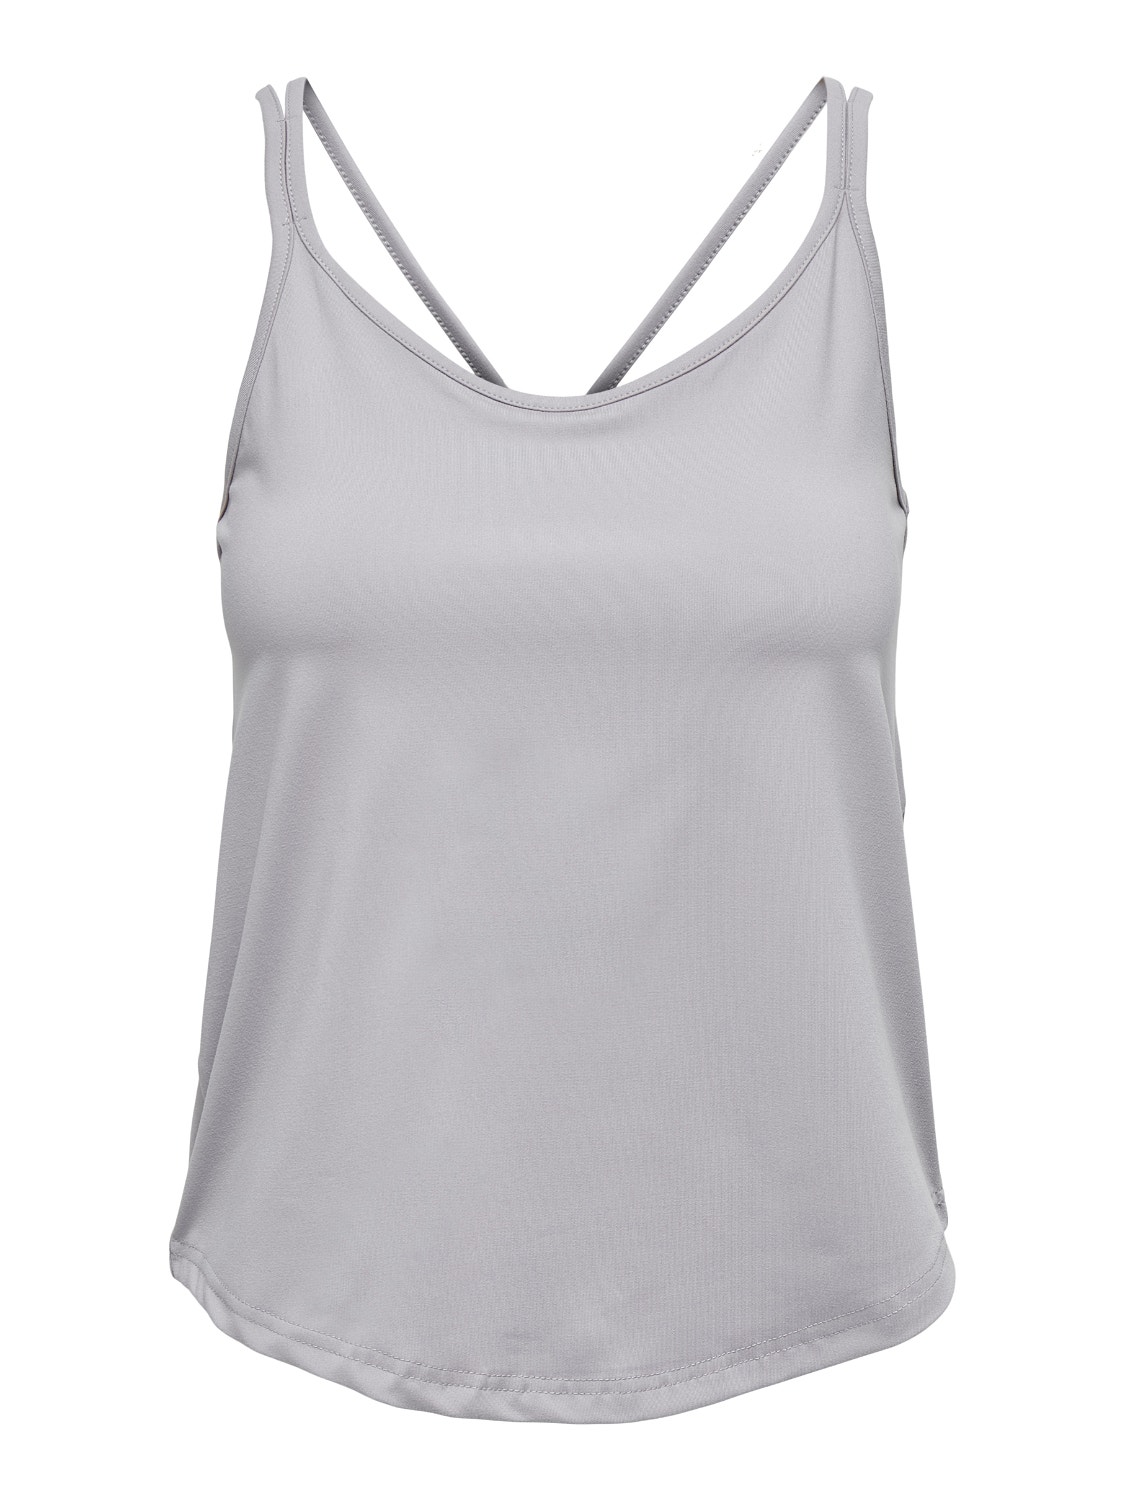 ONLY Mouwloos Sporttop -Gull Gray - 15244262